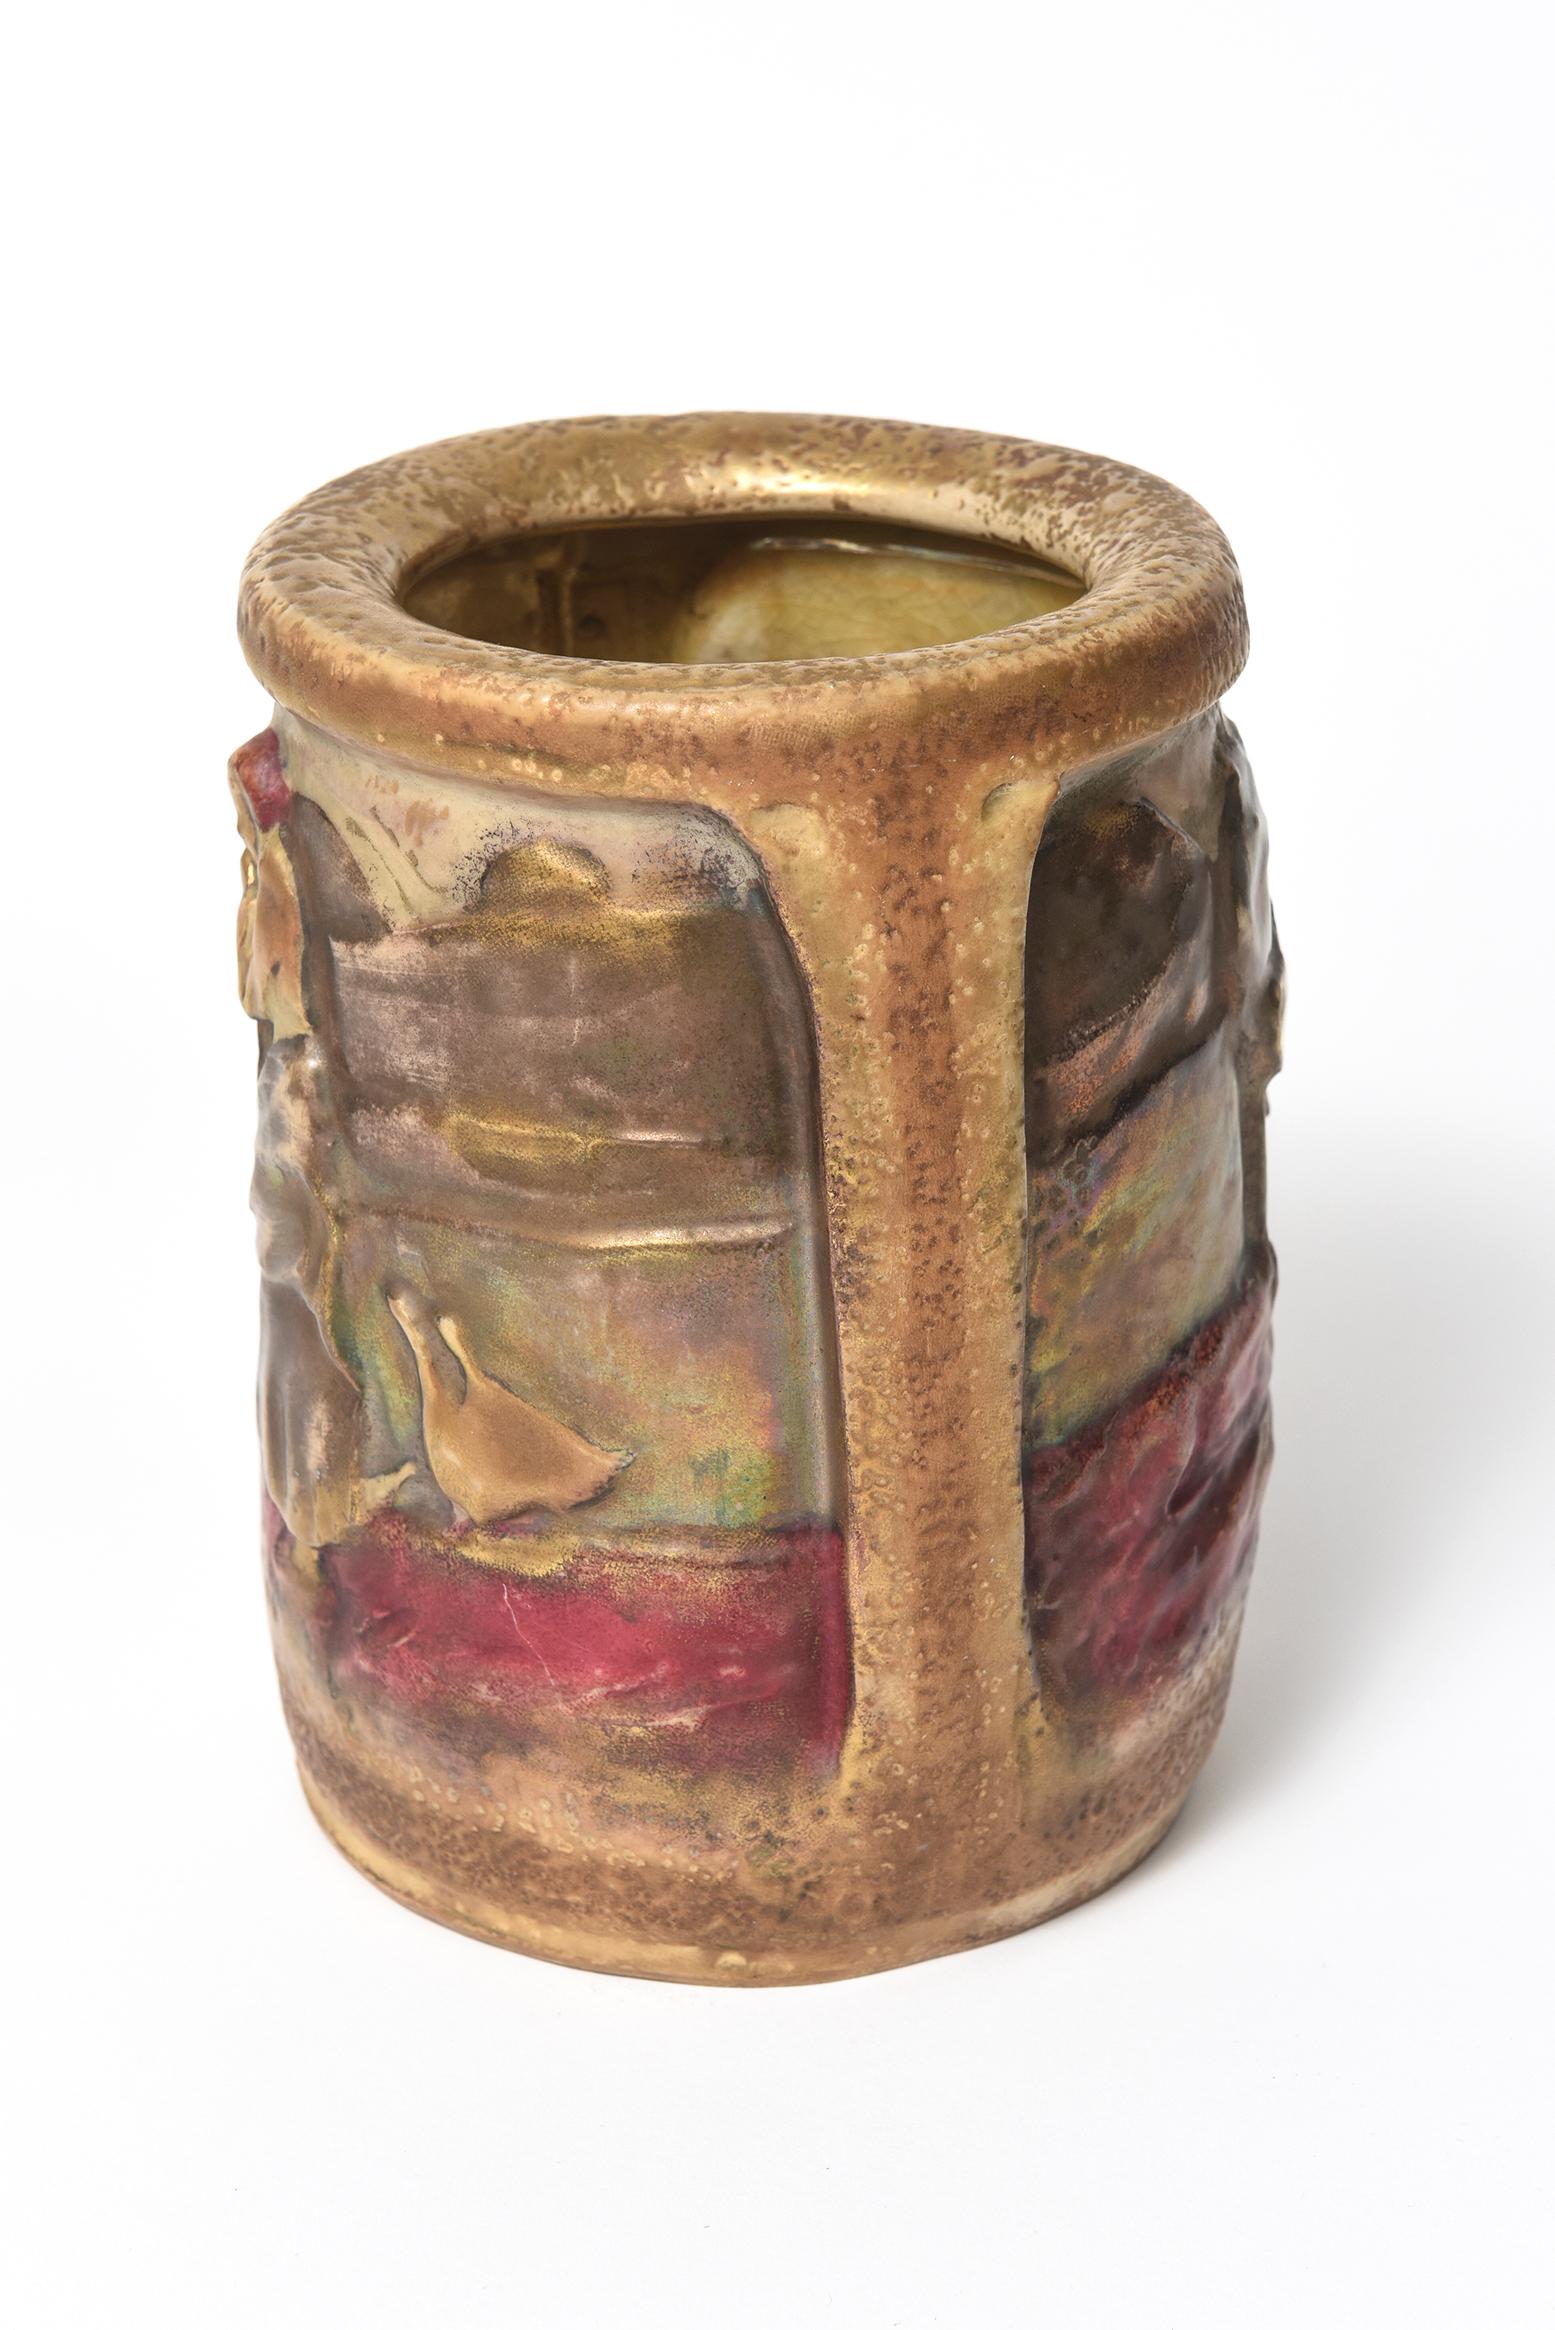 Circa 1905 - 1910 attributed to Elvir Otto for Riessner, Stellmacher and Kessel Amphora Templitz Pottery Vase. This arts and crafts vase stands approx 7